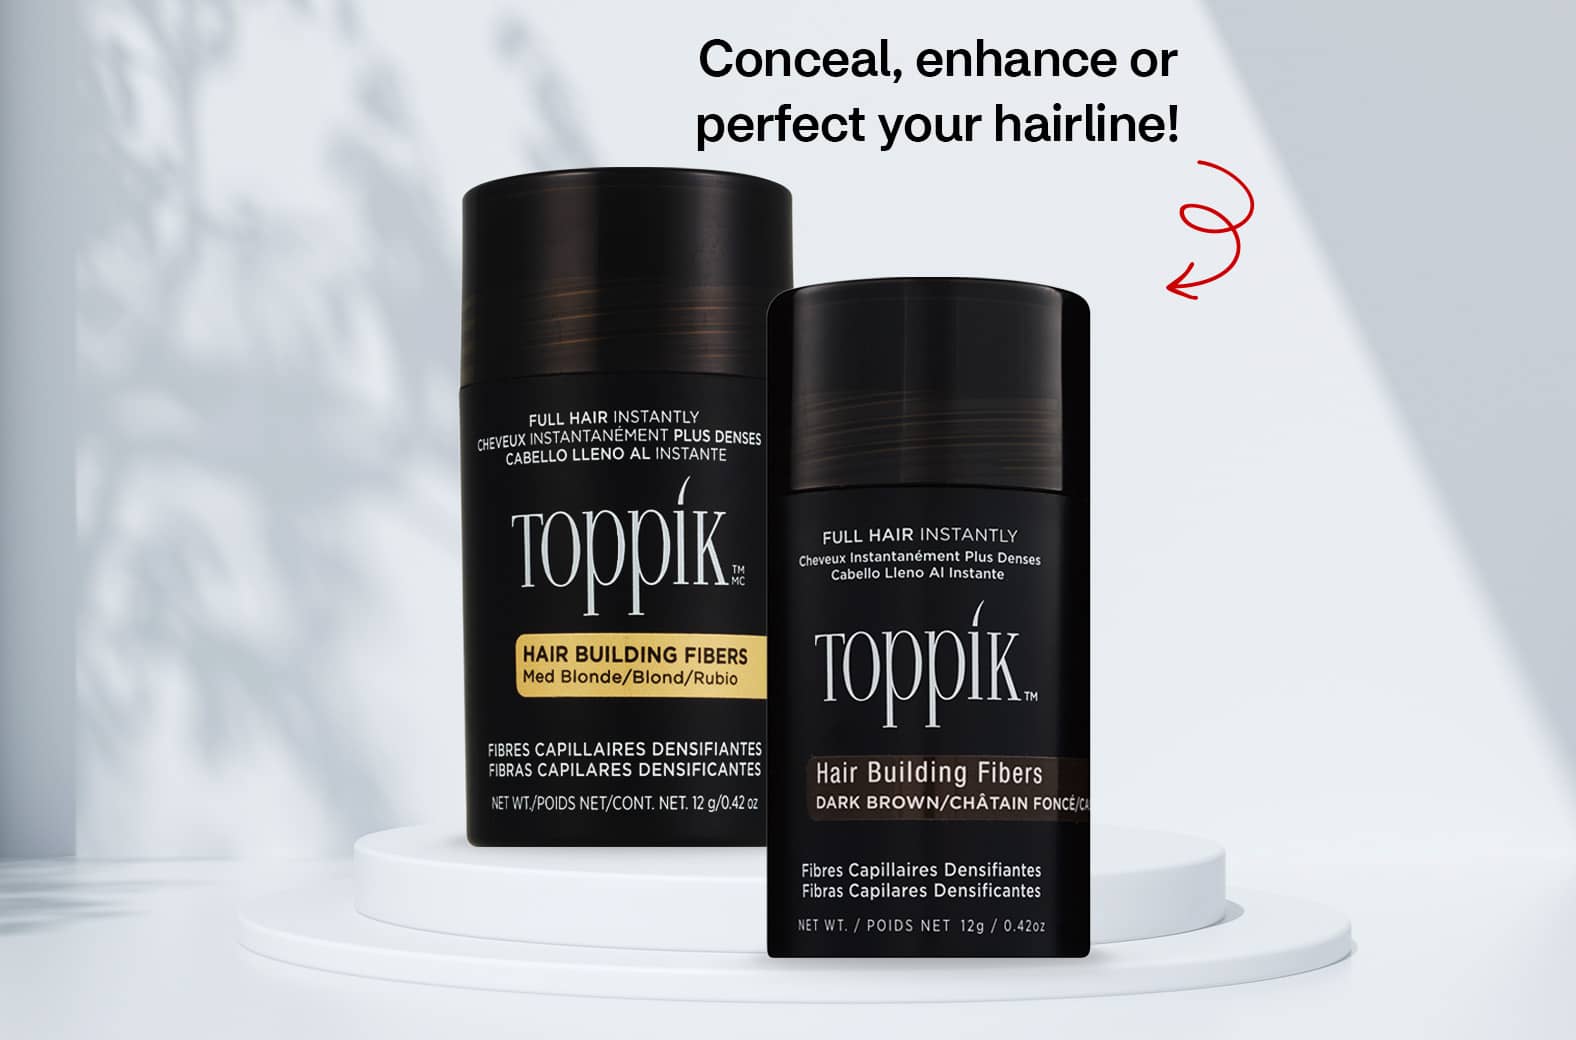 Conceal, enhance or perfect your hairline! Toppik™ hair-building fibers product